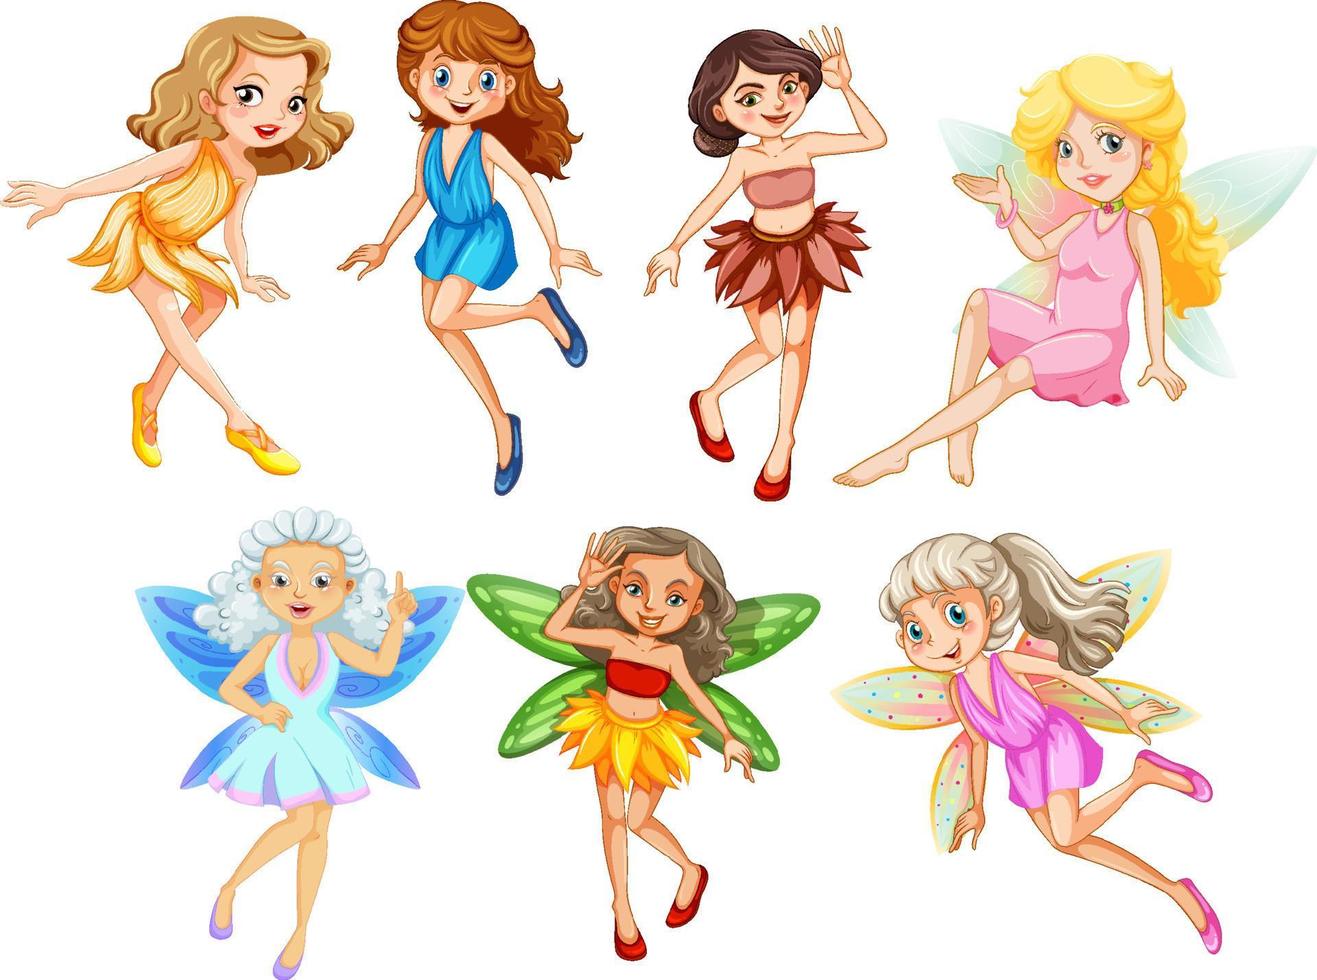 A set of lovely fairy on white background vector